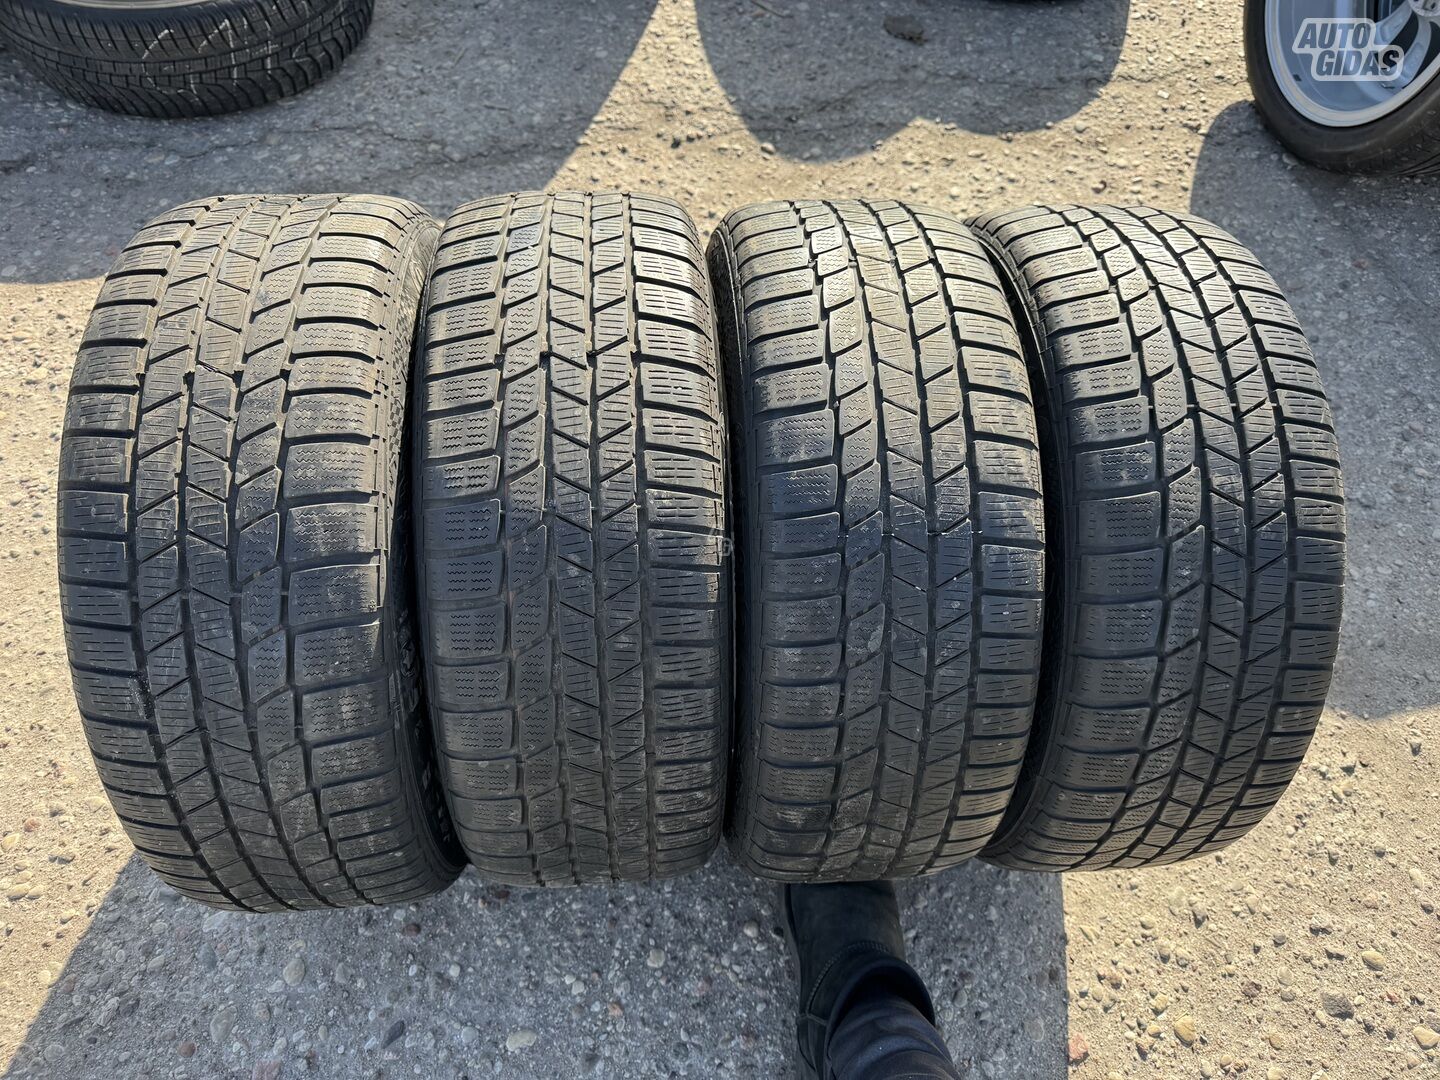 Continental Siunciam, 5-6mm 2019 R17 universal tyres passanger car